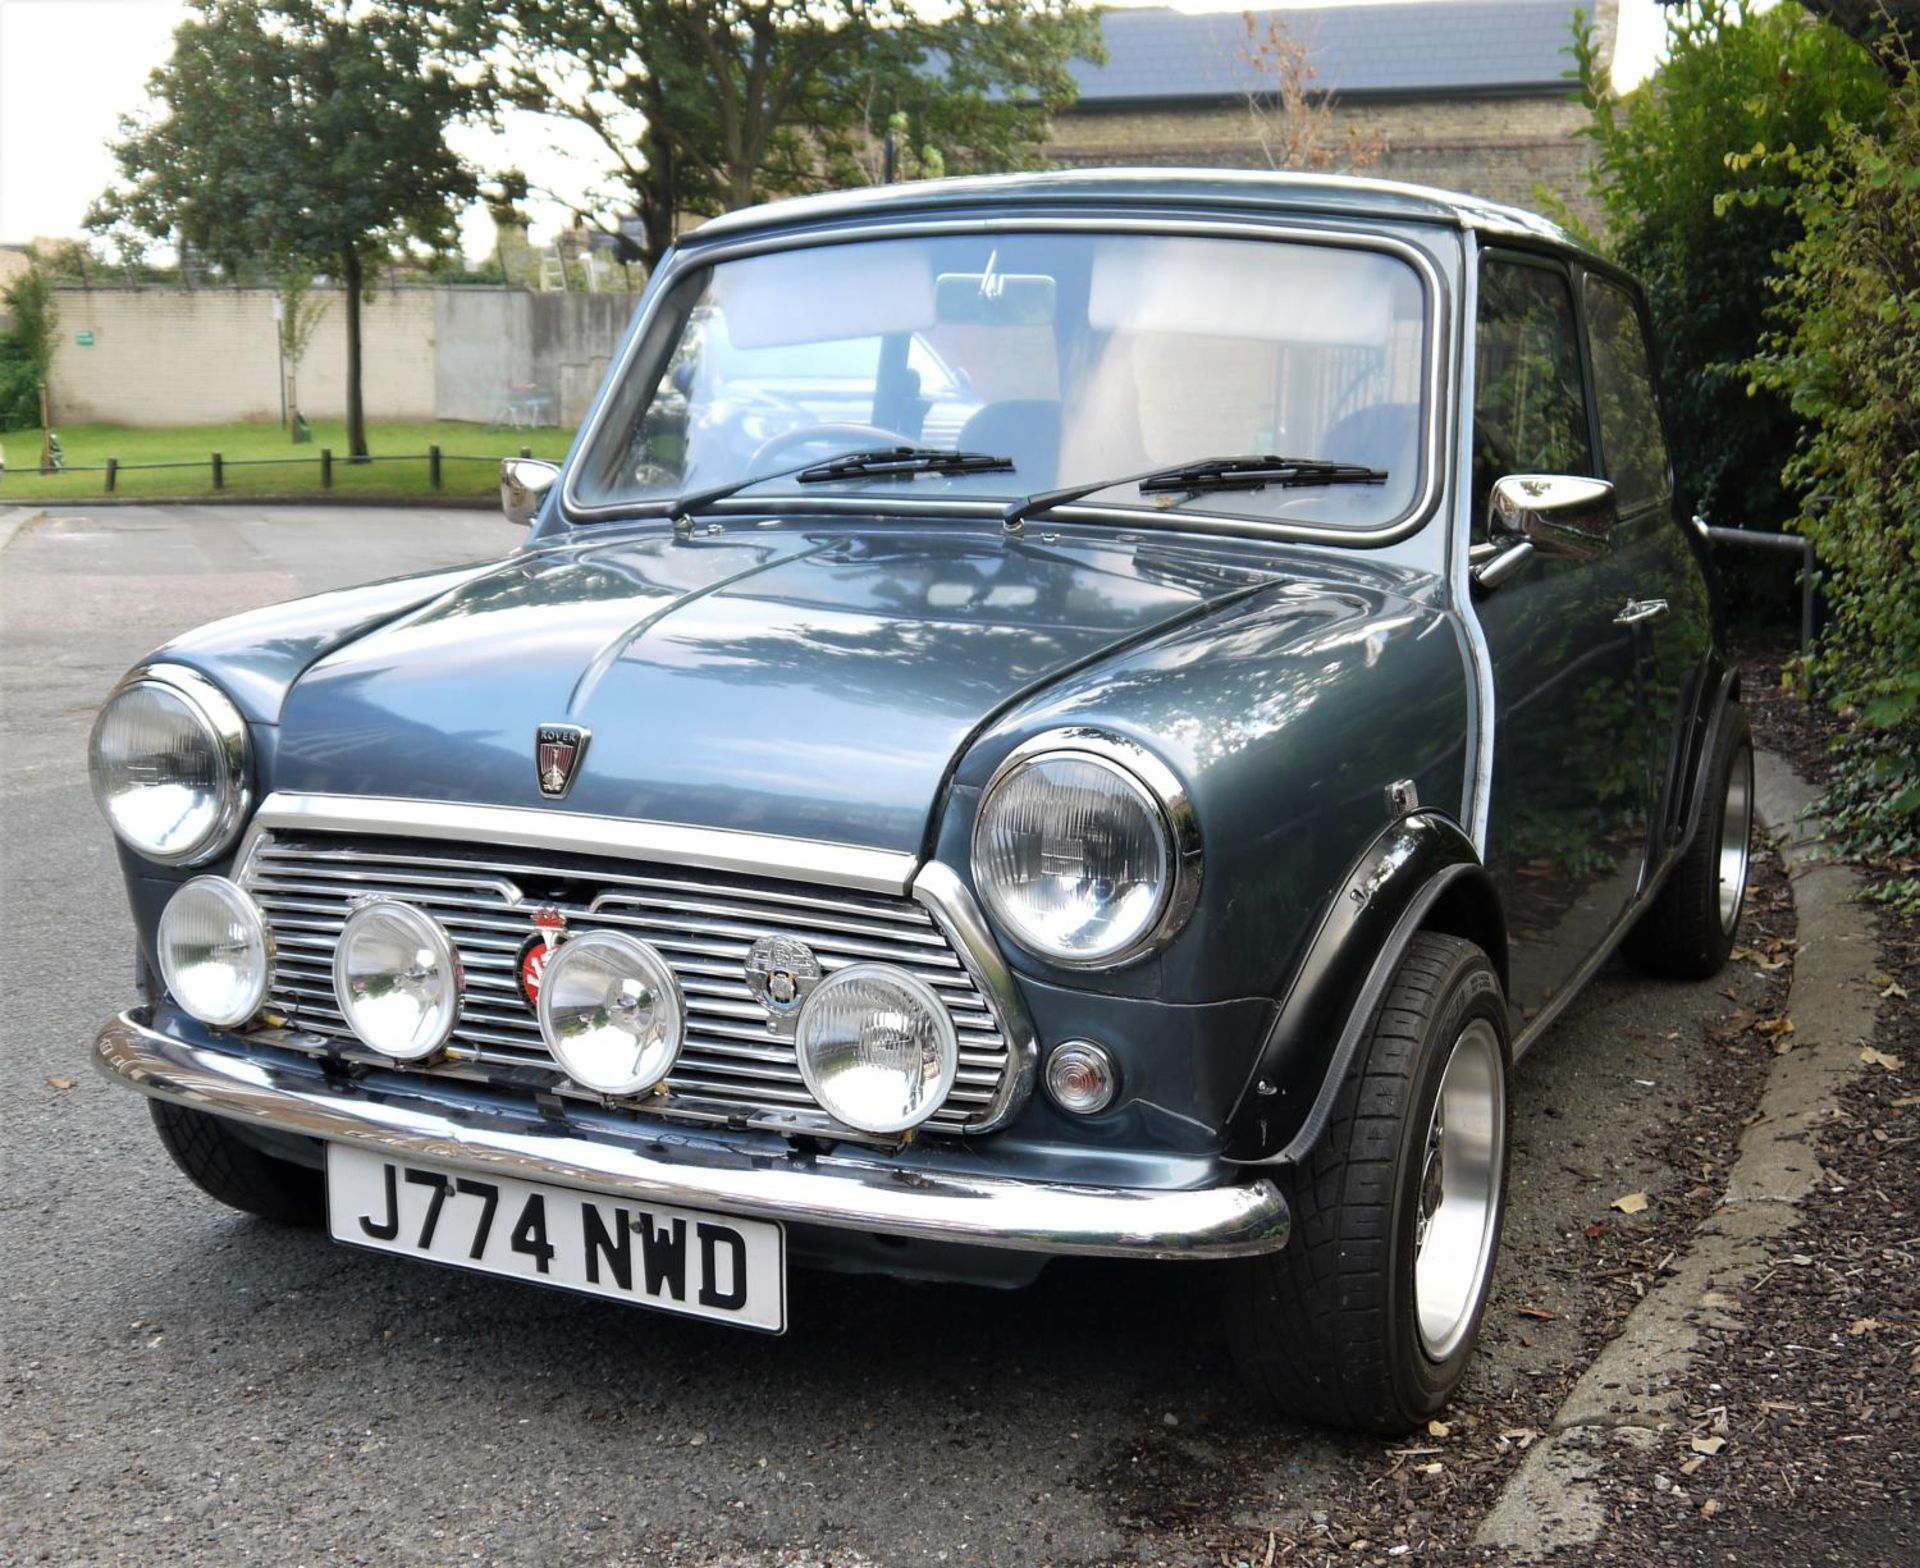 1991 ROVER MINI NEON Registration Number: J774 NWD Recorded Mileage: 58,000 miles Chassis Number: - Bild 5 aus 24